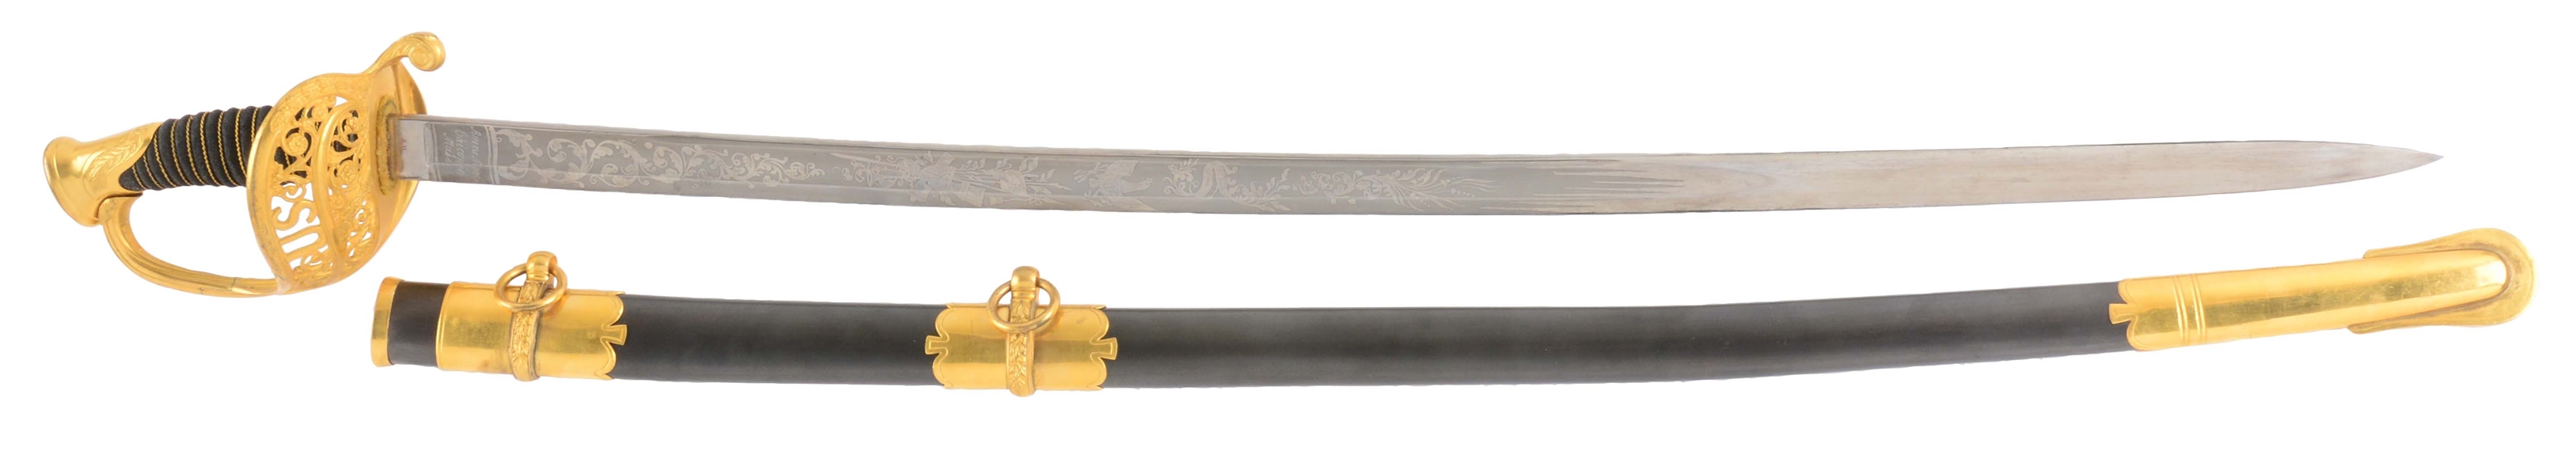 EXTREMELY FINE AMES MODEL 1850 STAFF & FIELD OFFICERS SABER WITH SCABBARD.